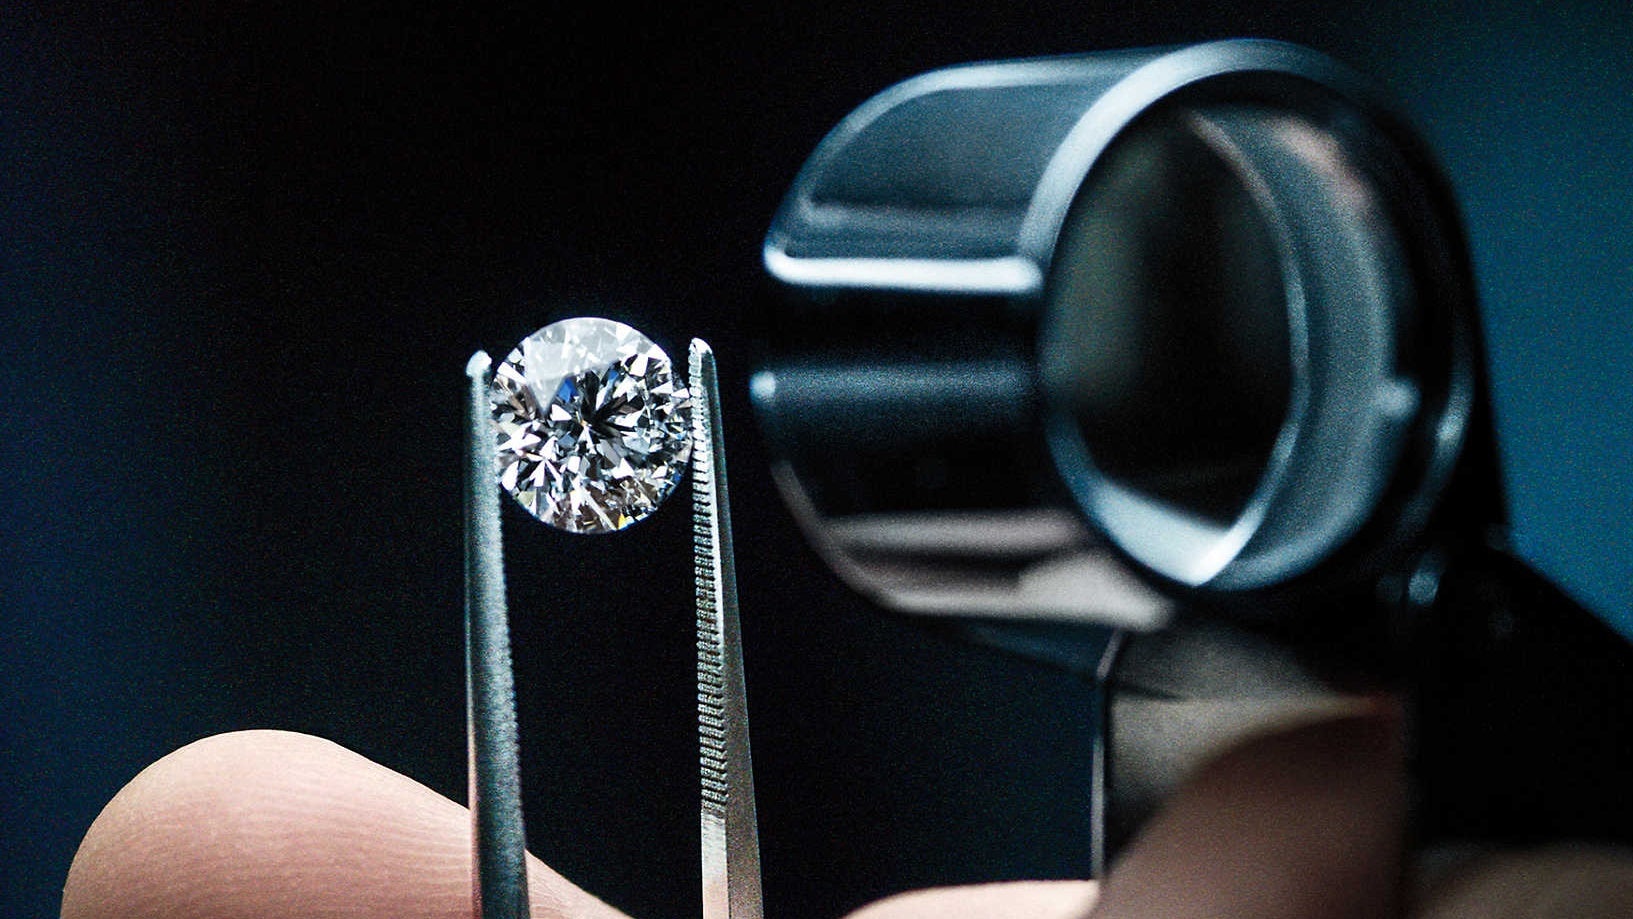 As consumers look for environmentally-friendly substitutes in luxury, never say never; lab-grown diamonds should not be dismissed too quickly. Photo: Courtesy of Tiffany & Co.